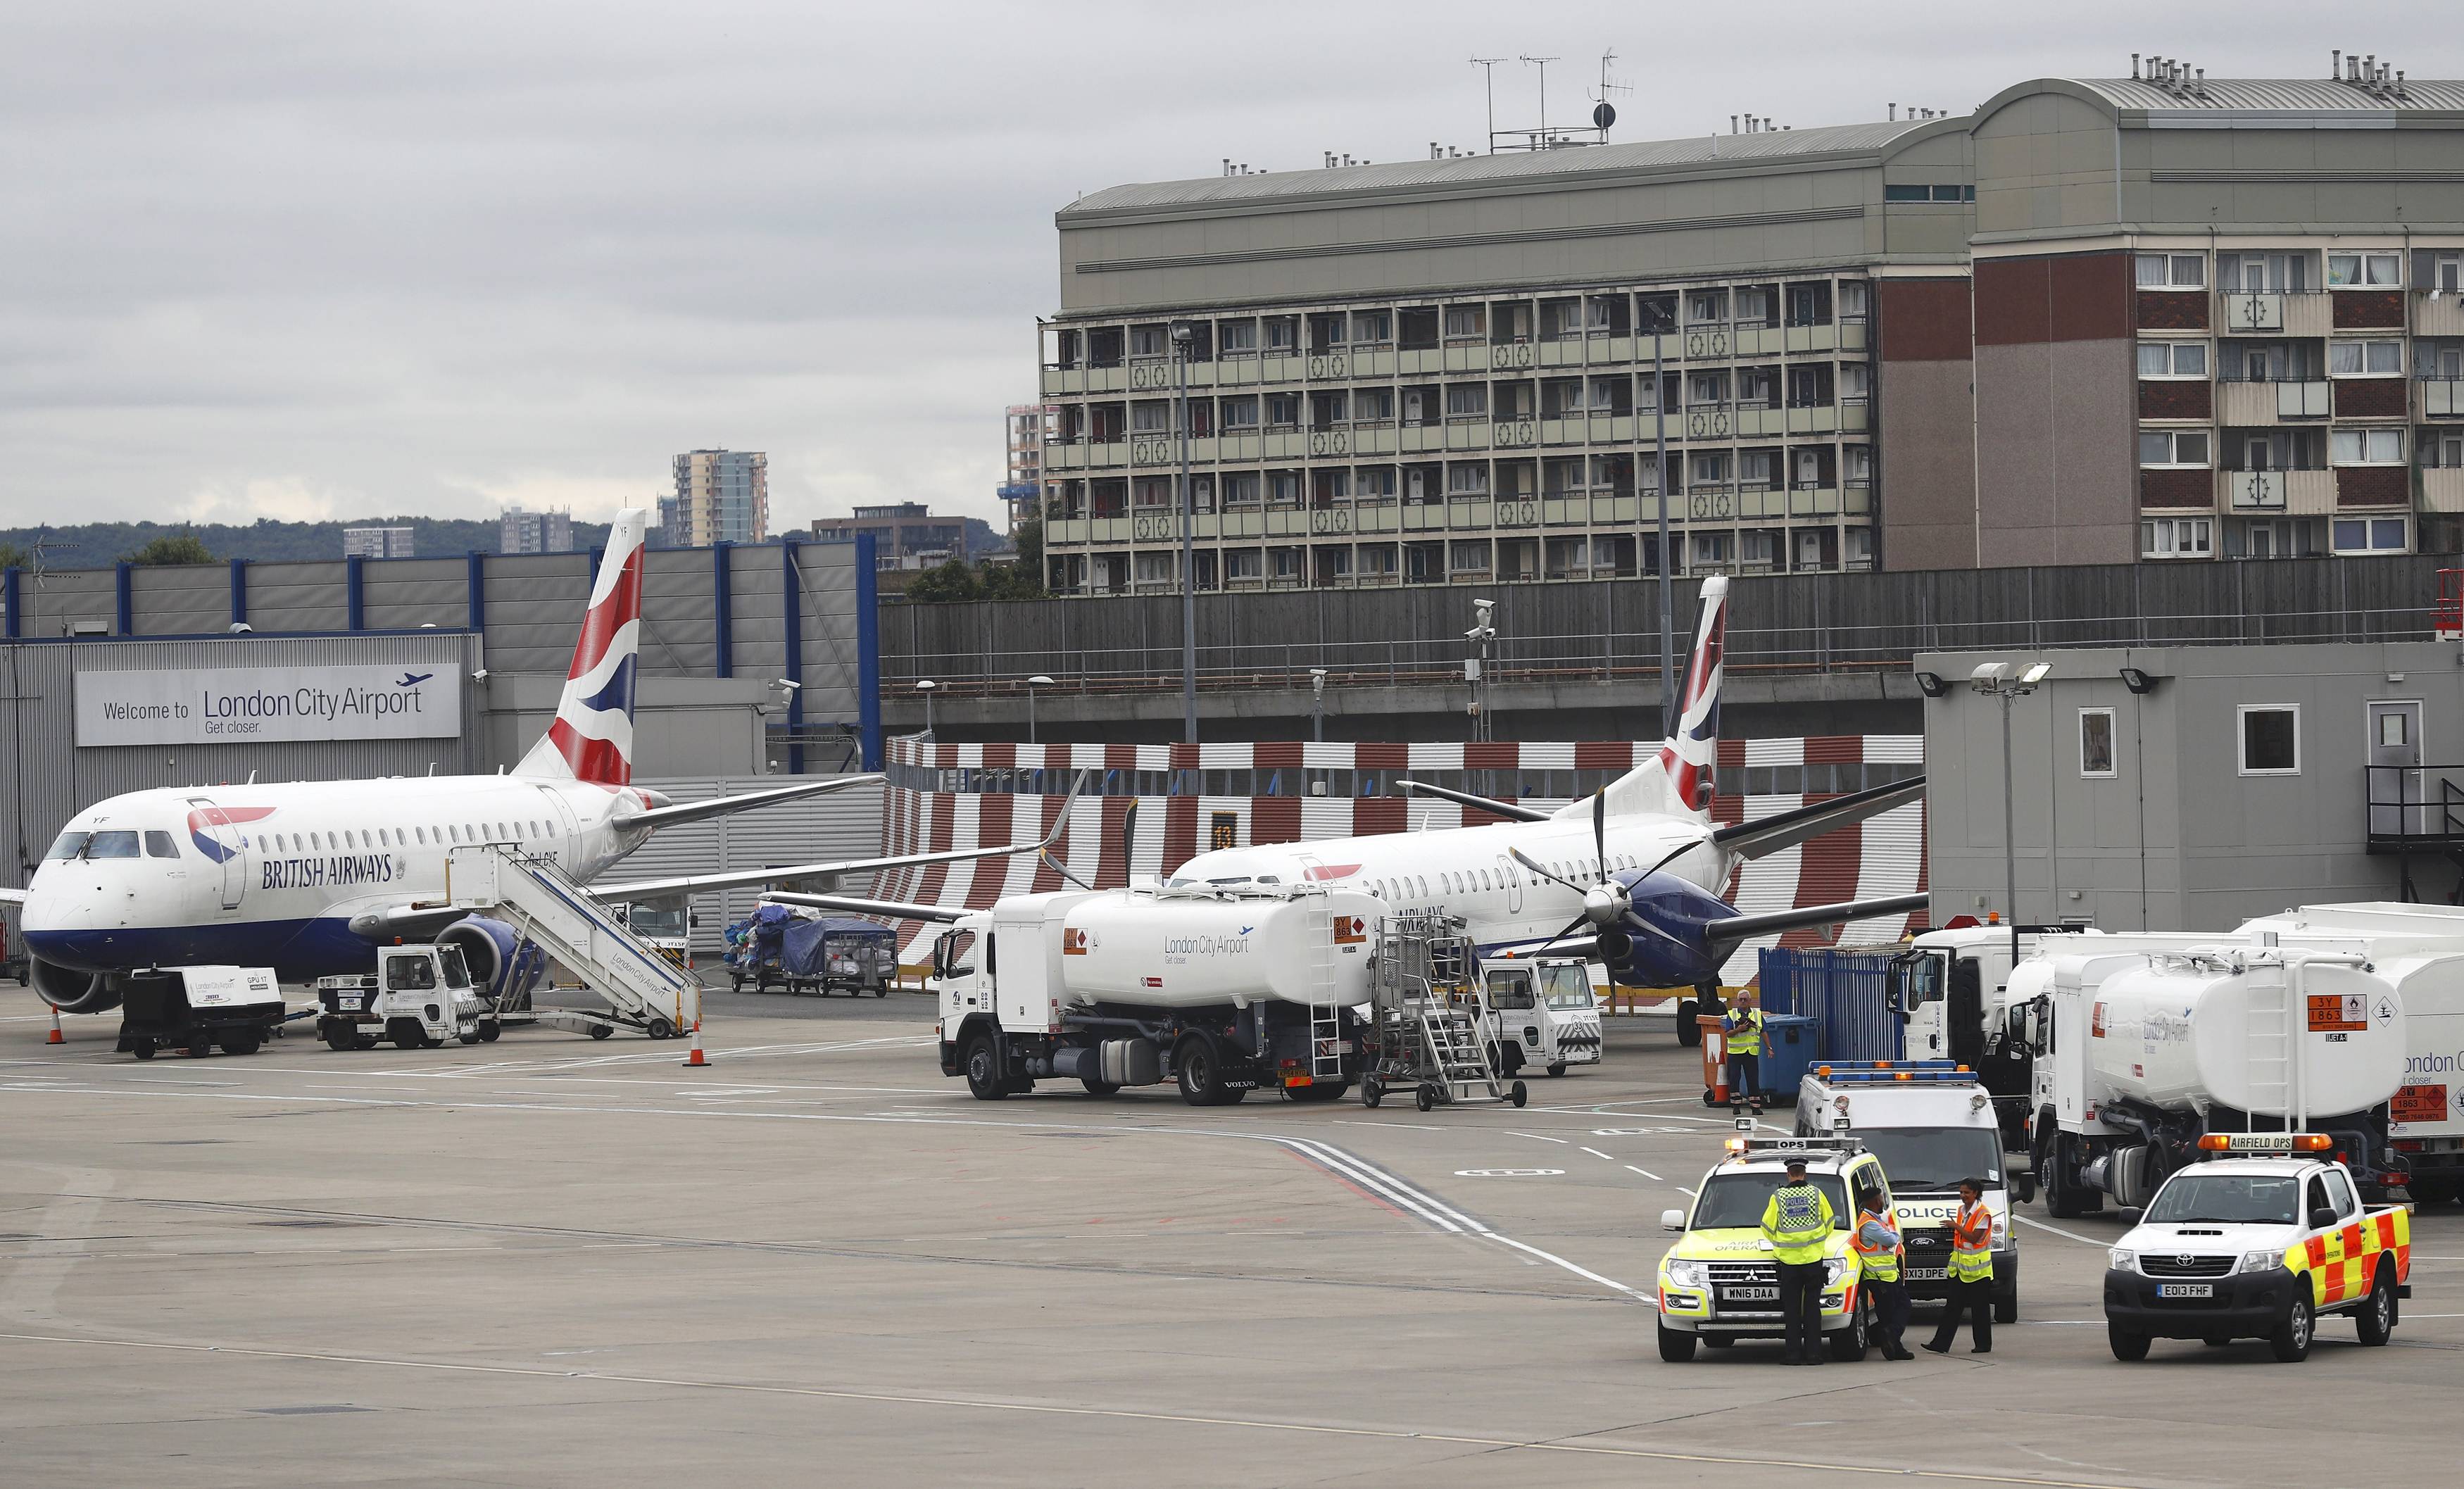 Air passengers hit by British Airways tech glitch, London City airport protest